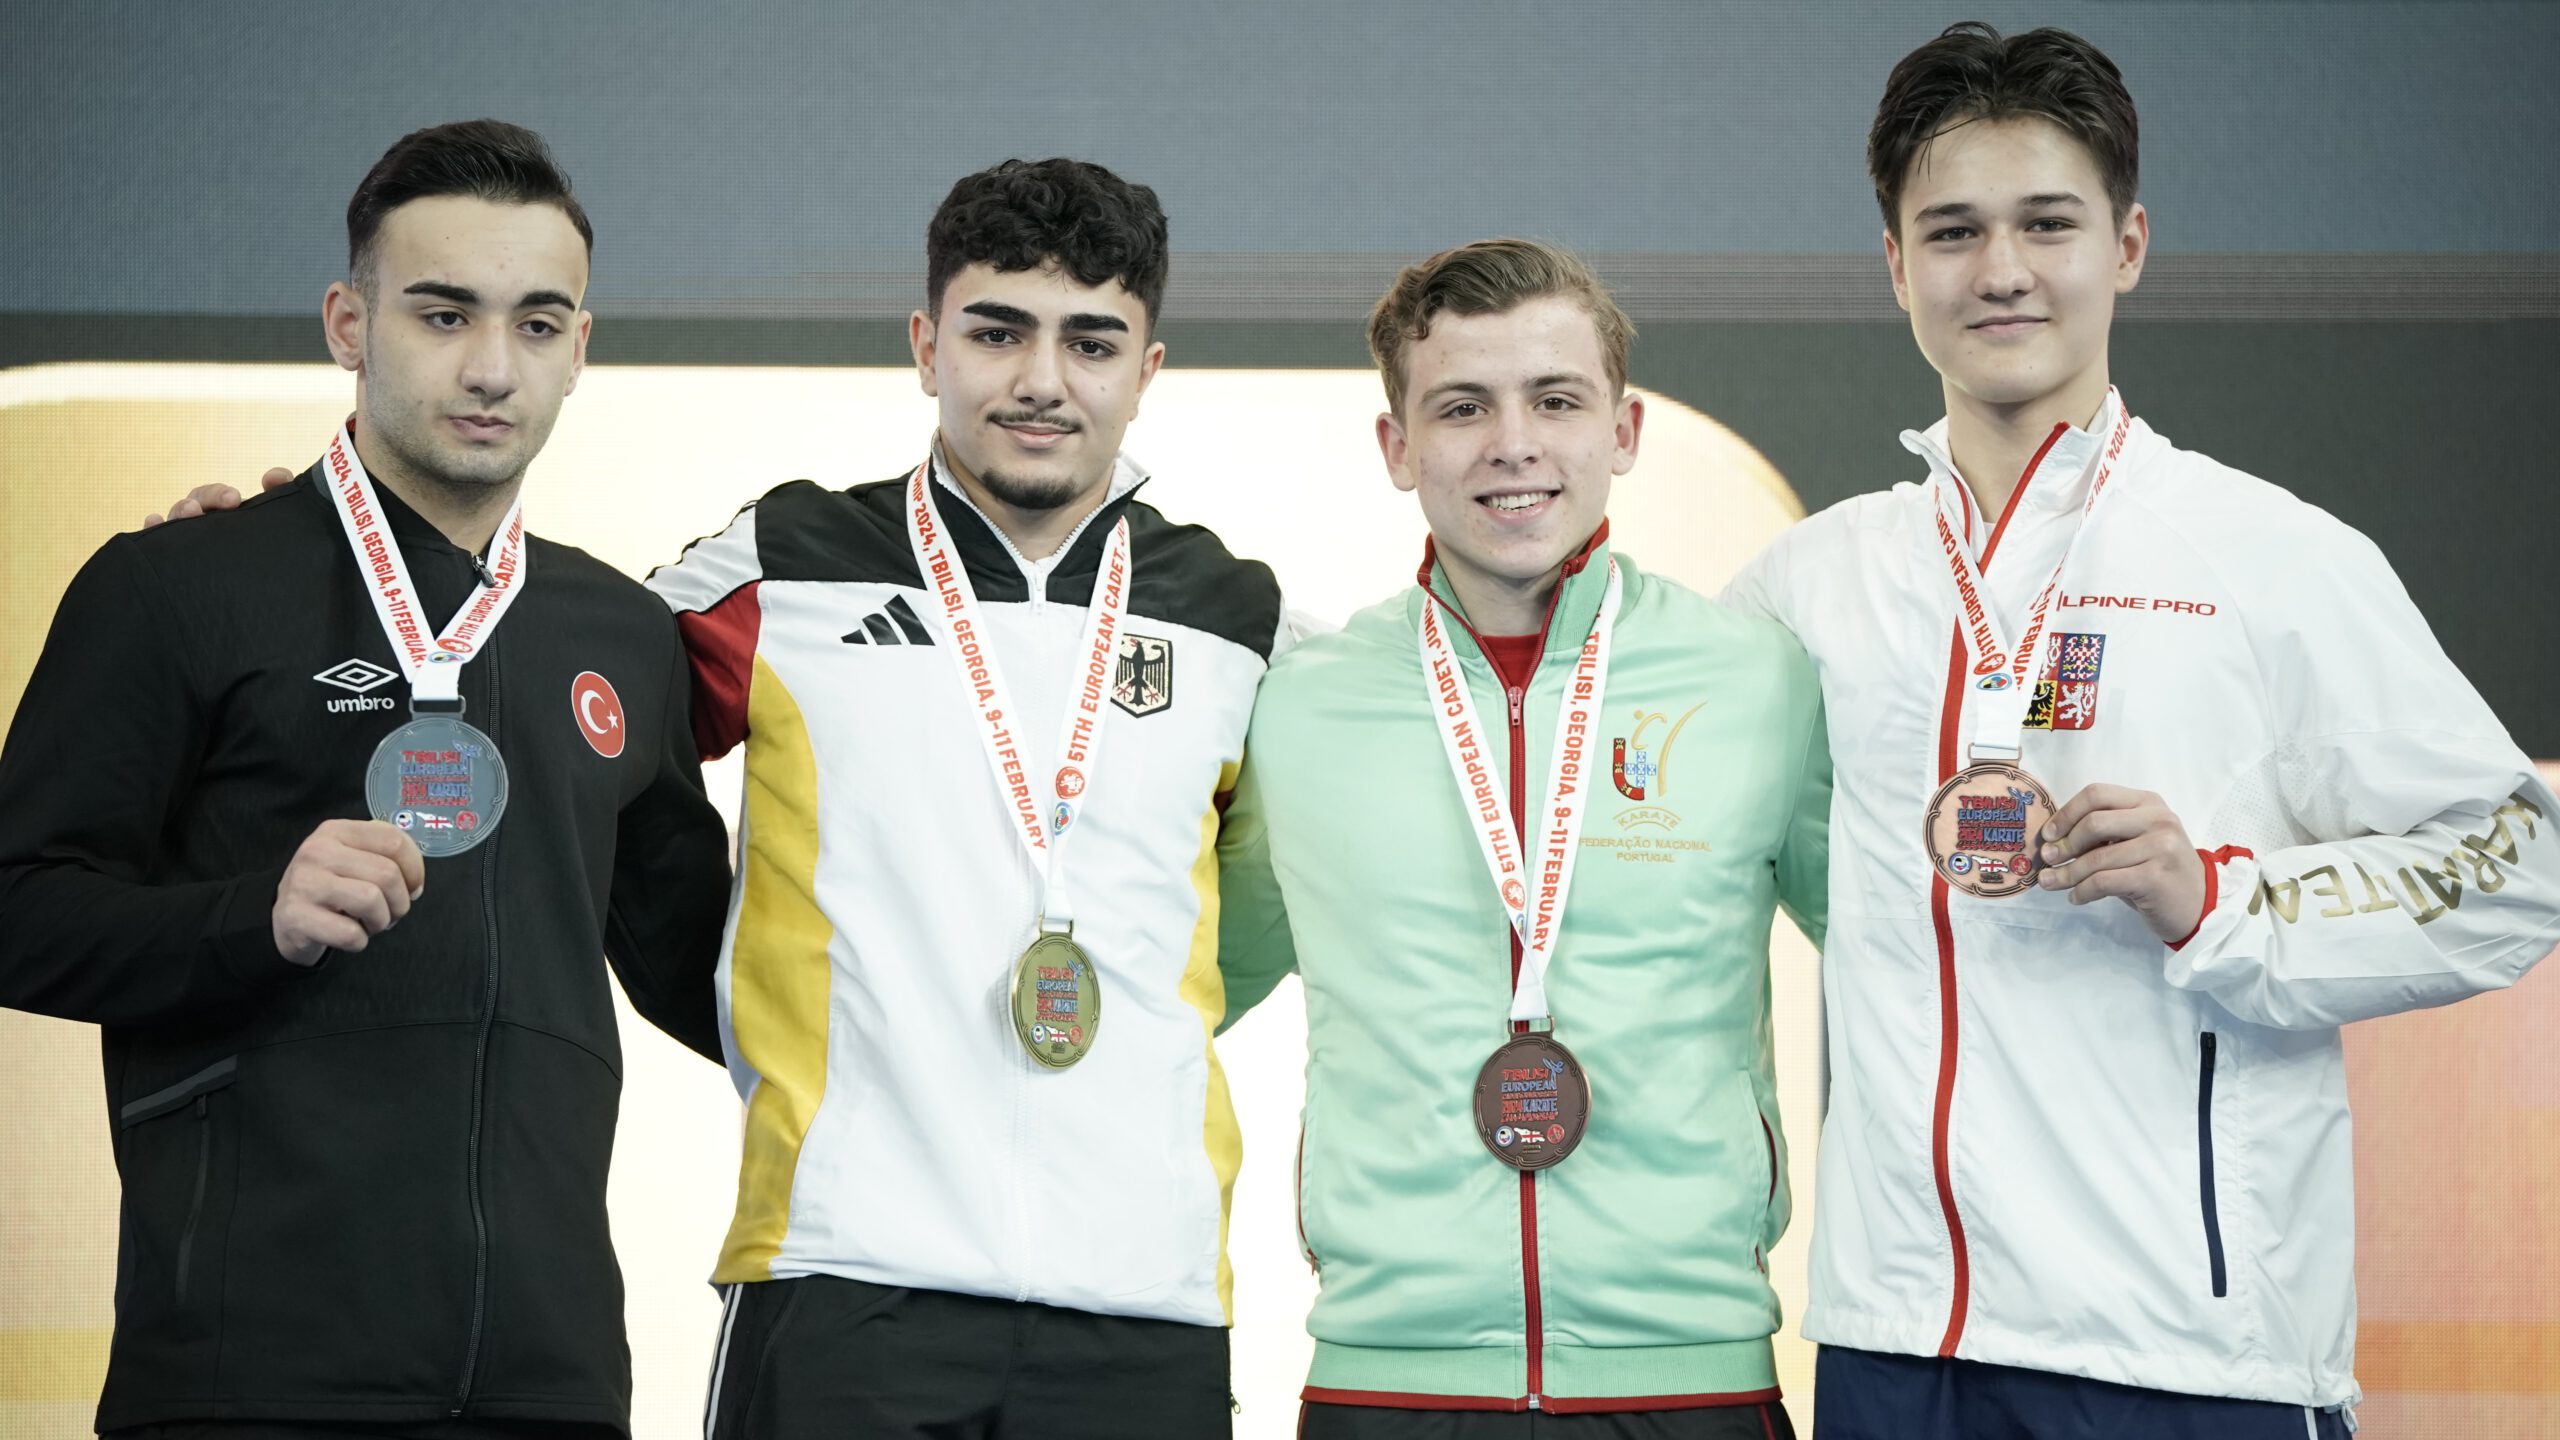 This photo taken during the European Cadet, Junior, U21 Karate Championships in New Sports Palace in Tbilisi, Georgia between 9-11 February 2024.

© All rights reserved - Gökhan Taner / Gokhan Taner Photography